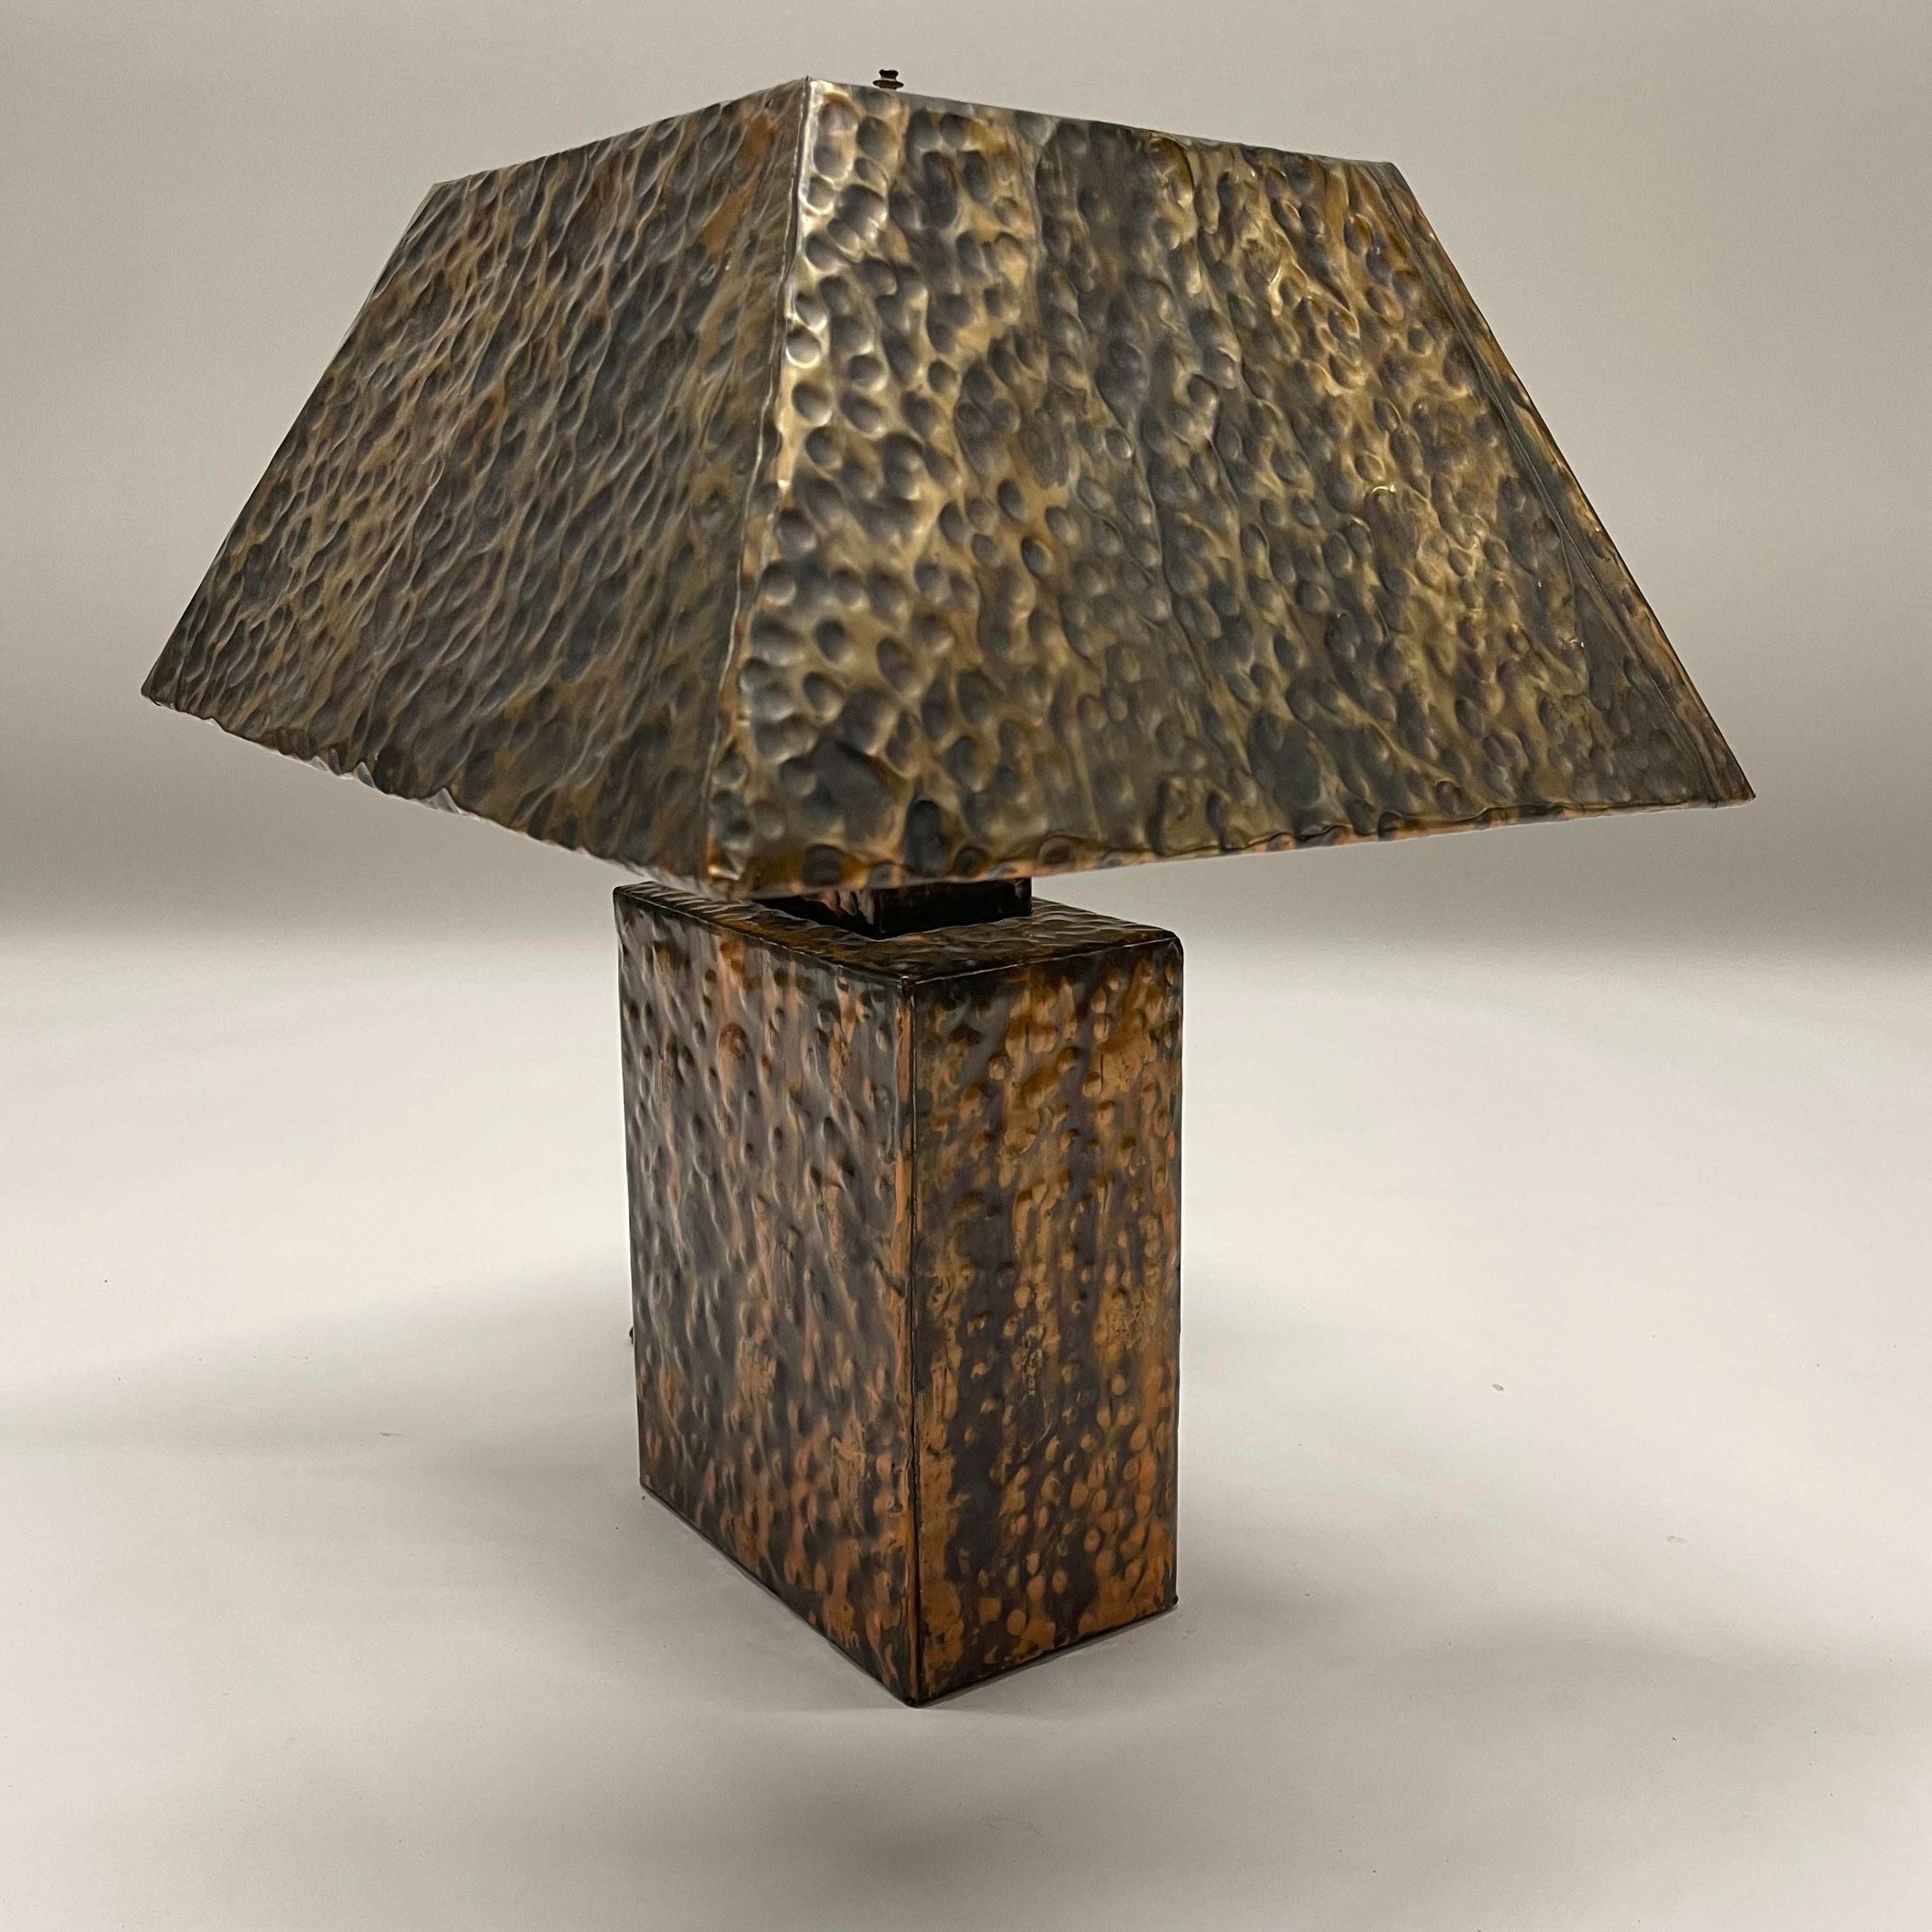 Italian Mid-Century Brutalist Hand Hammered Copper Lamp and Shade, Italy, 1970s For Sale 3